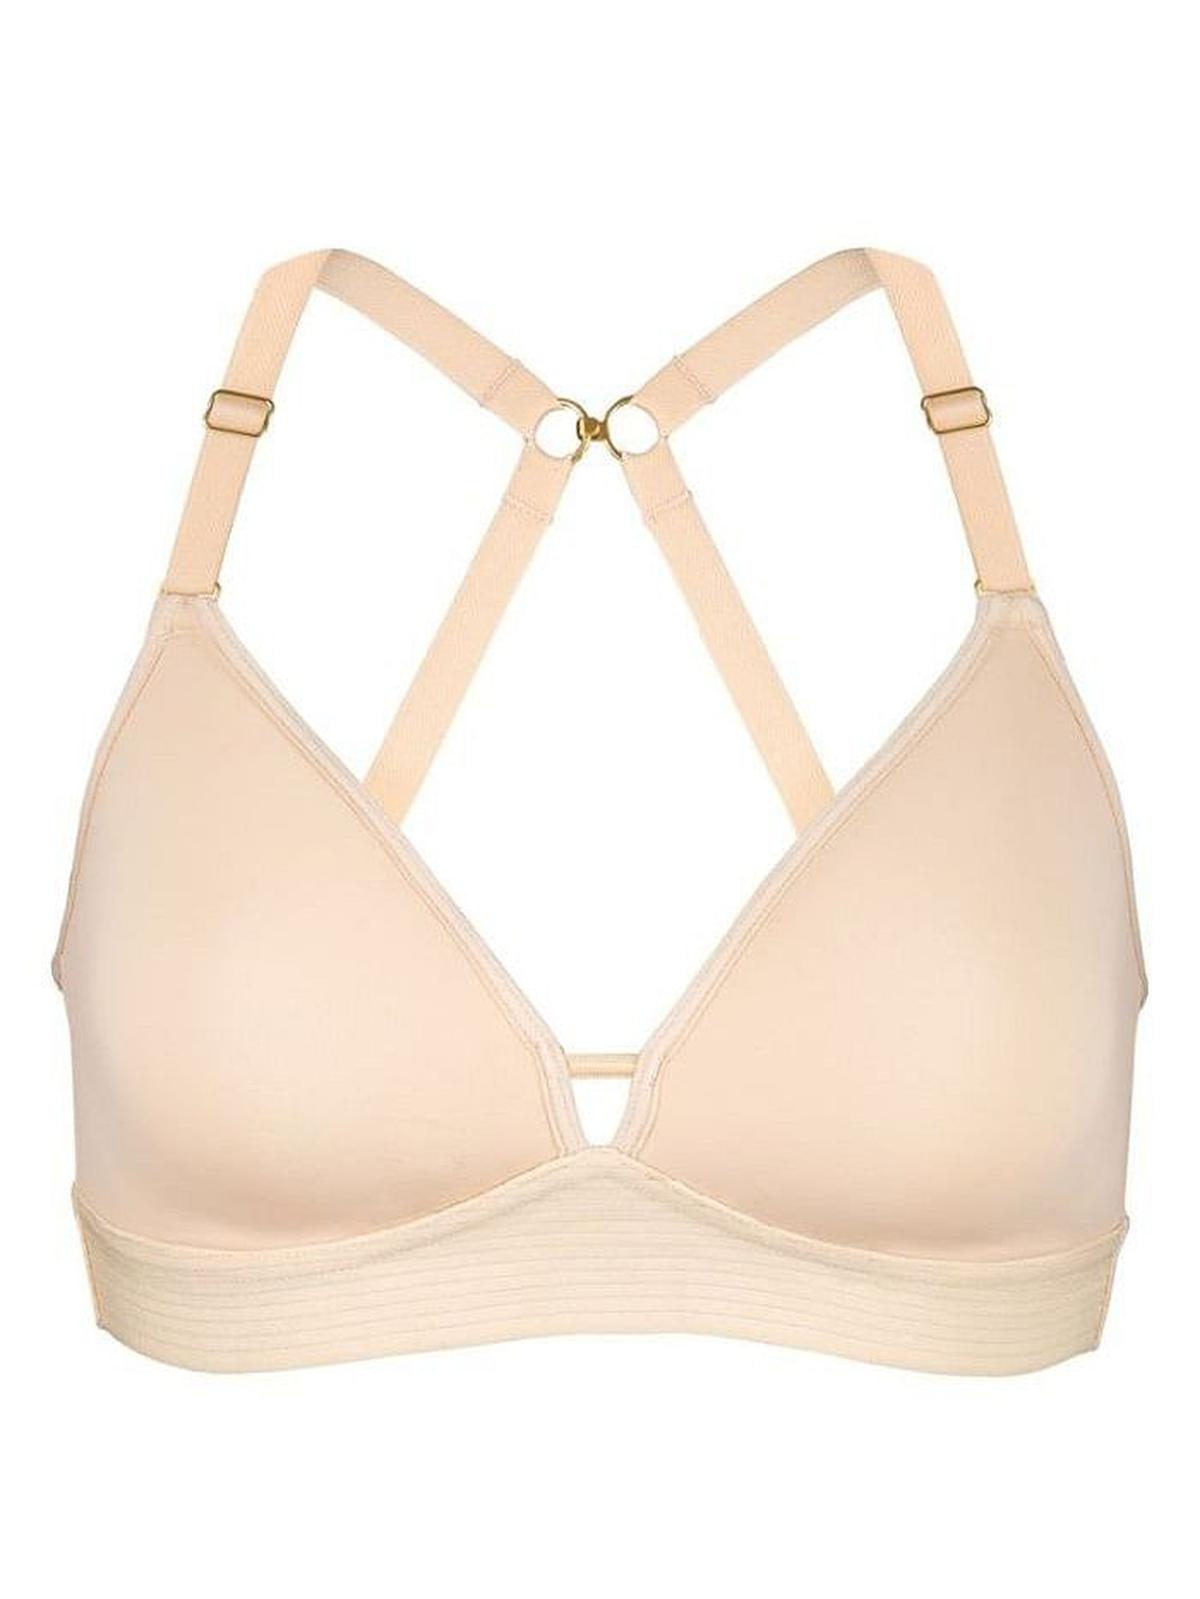 Wear Lively The Spacer Bra New with tags